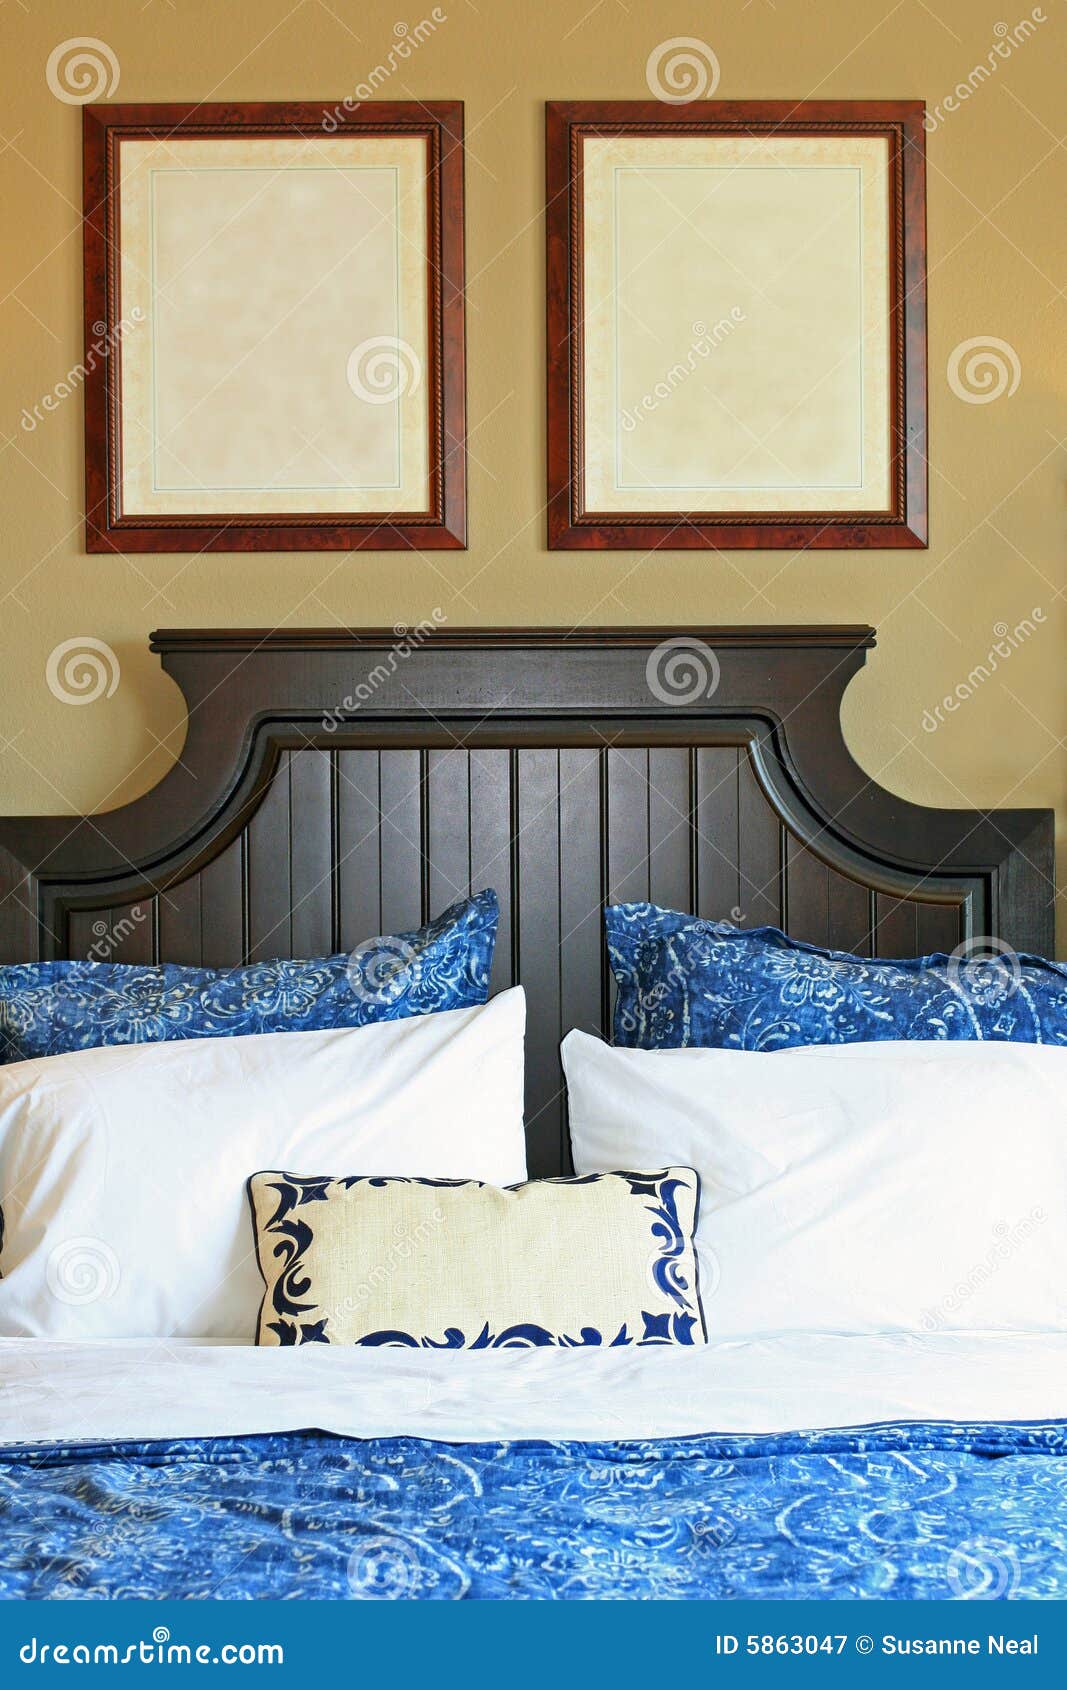 blank pictures on wall above bed